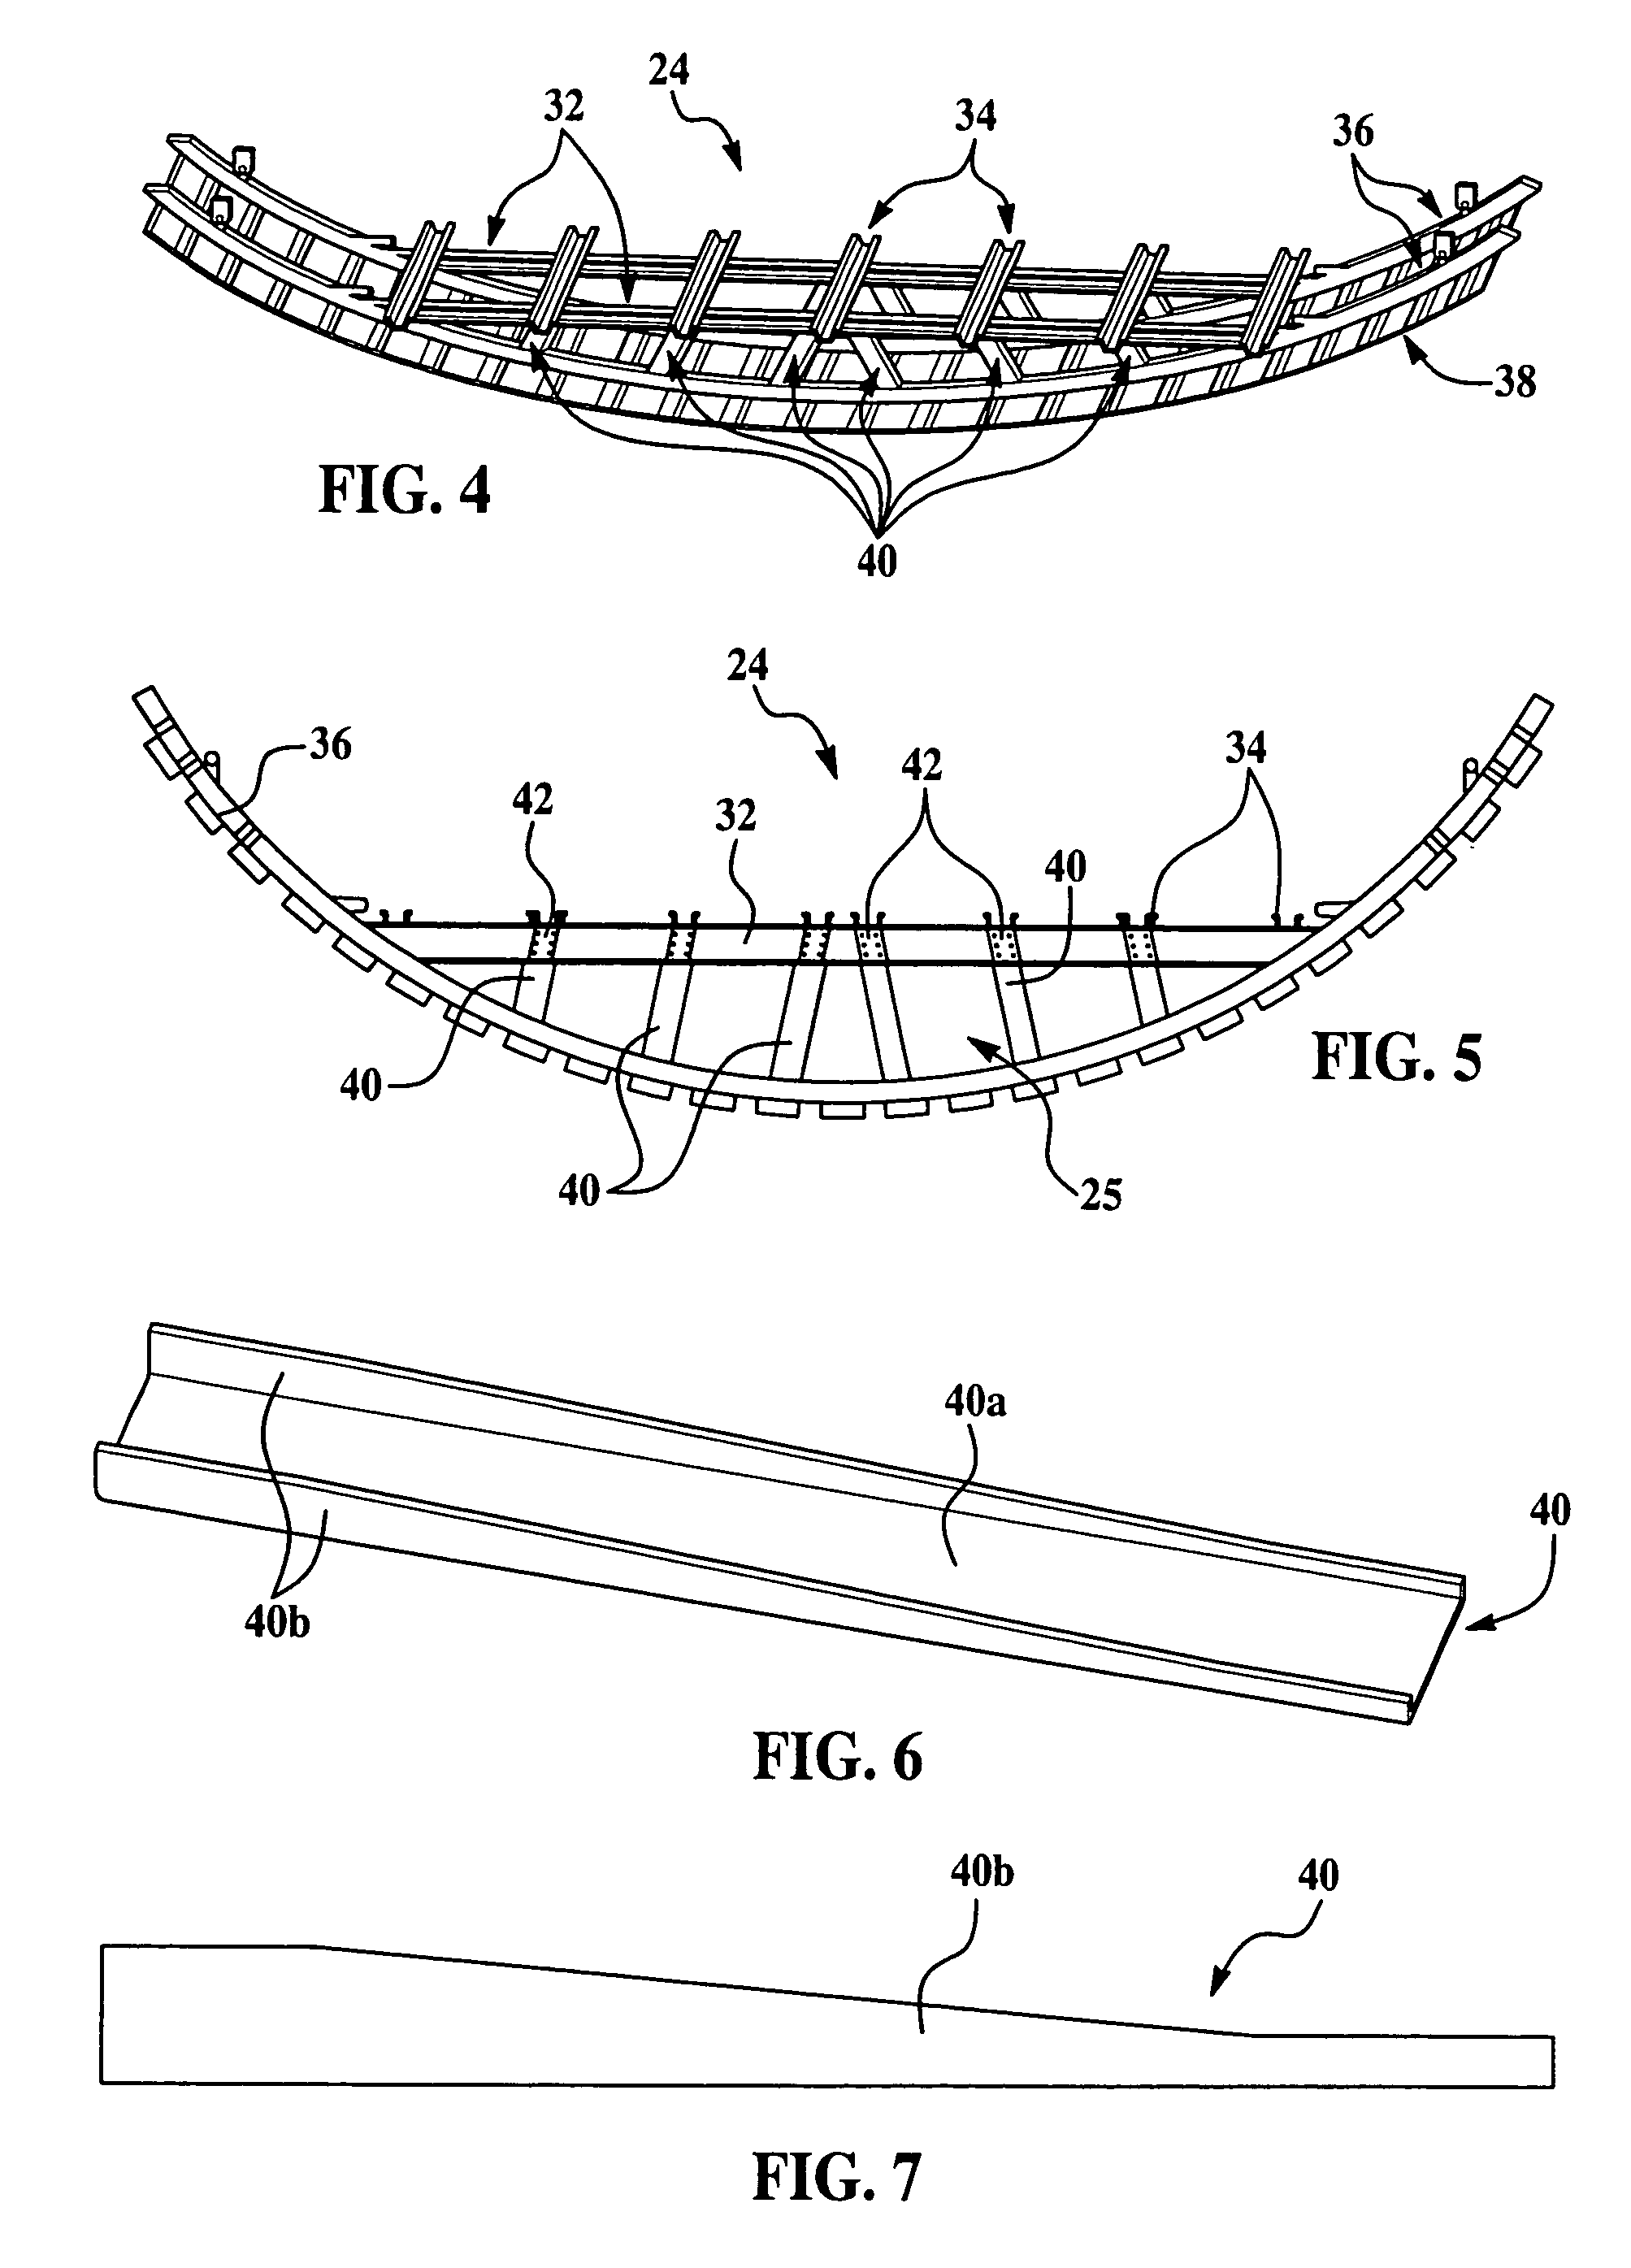 Energy absorbing structure for aircraft